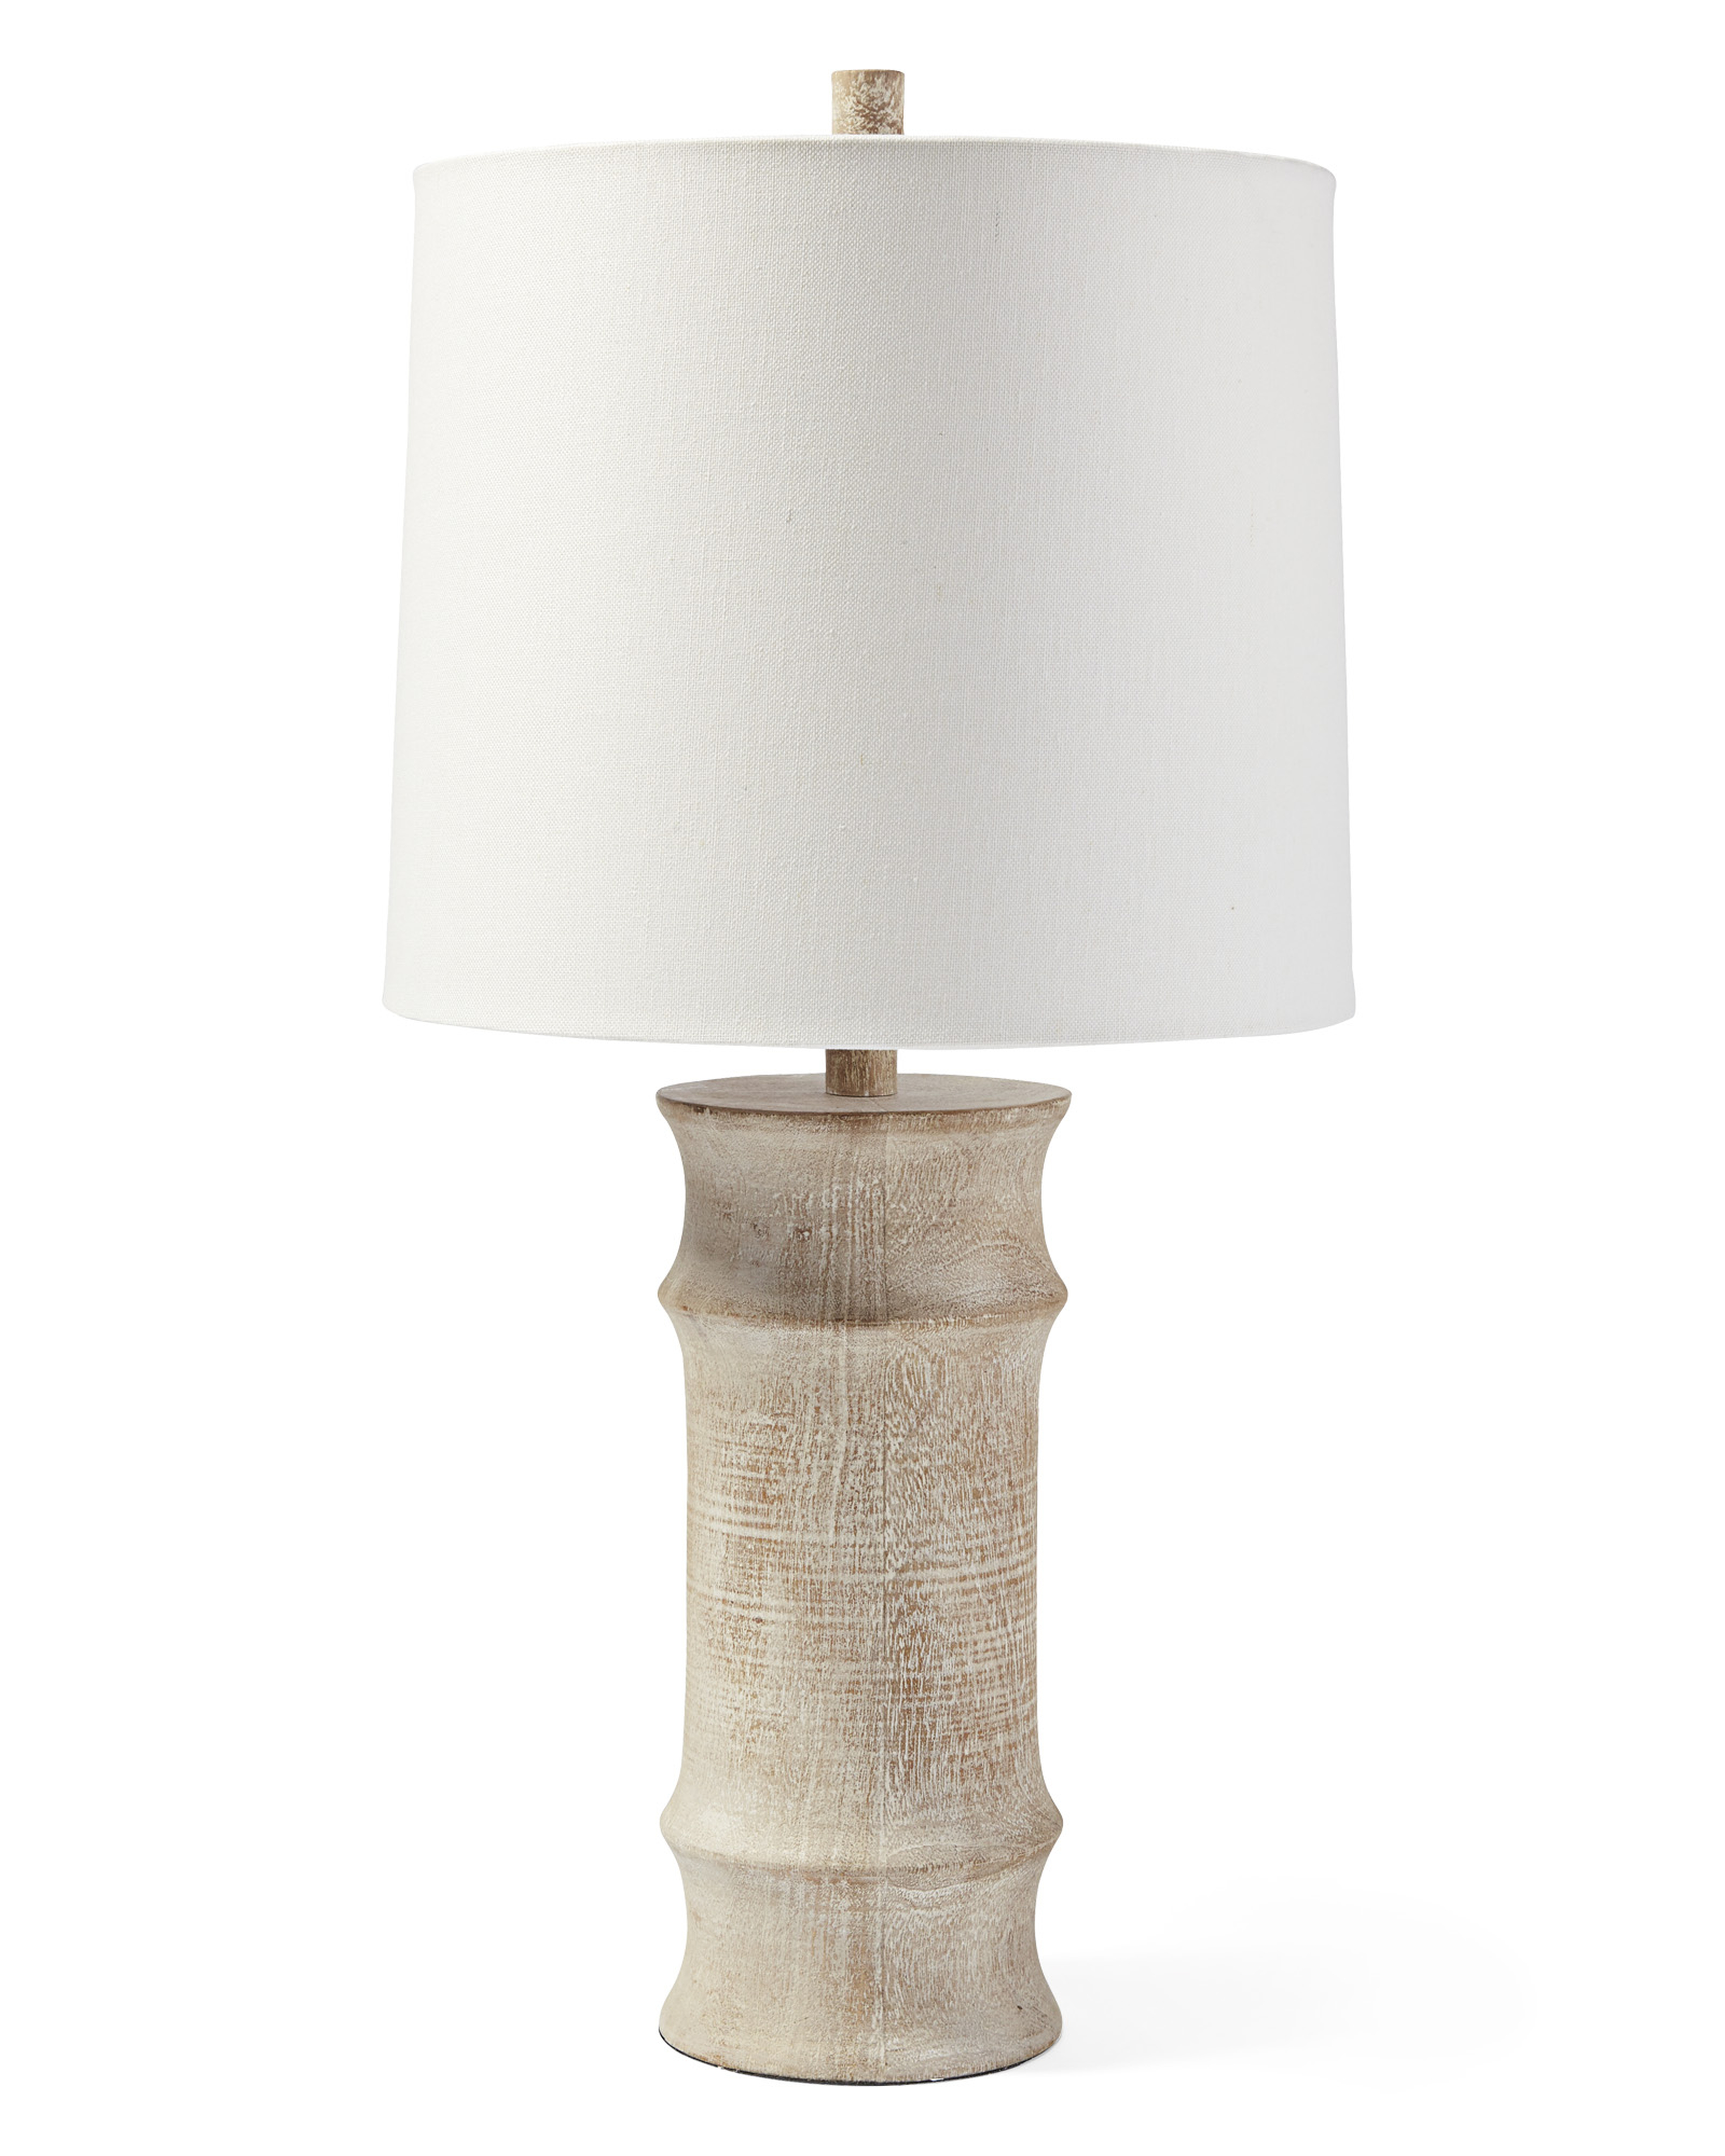 Halsey Table Lamp - Serena and Lily